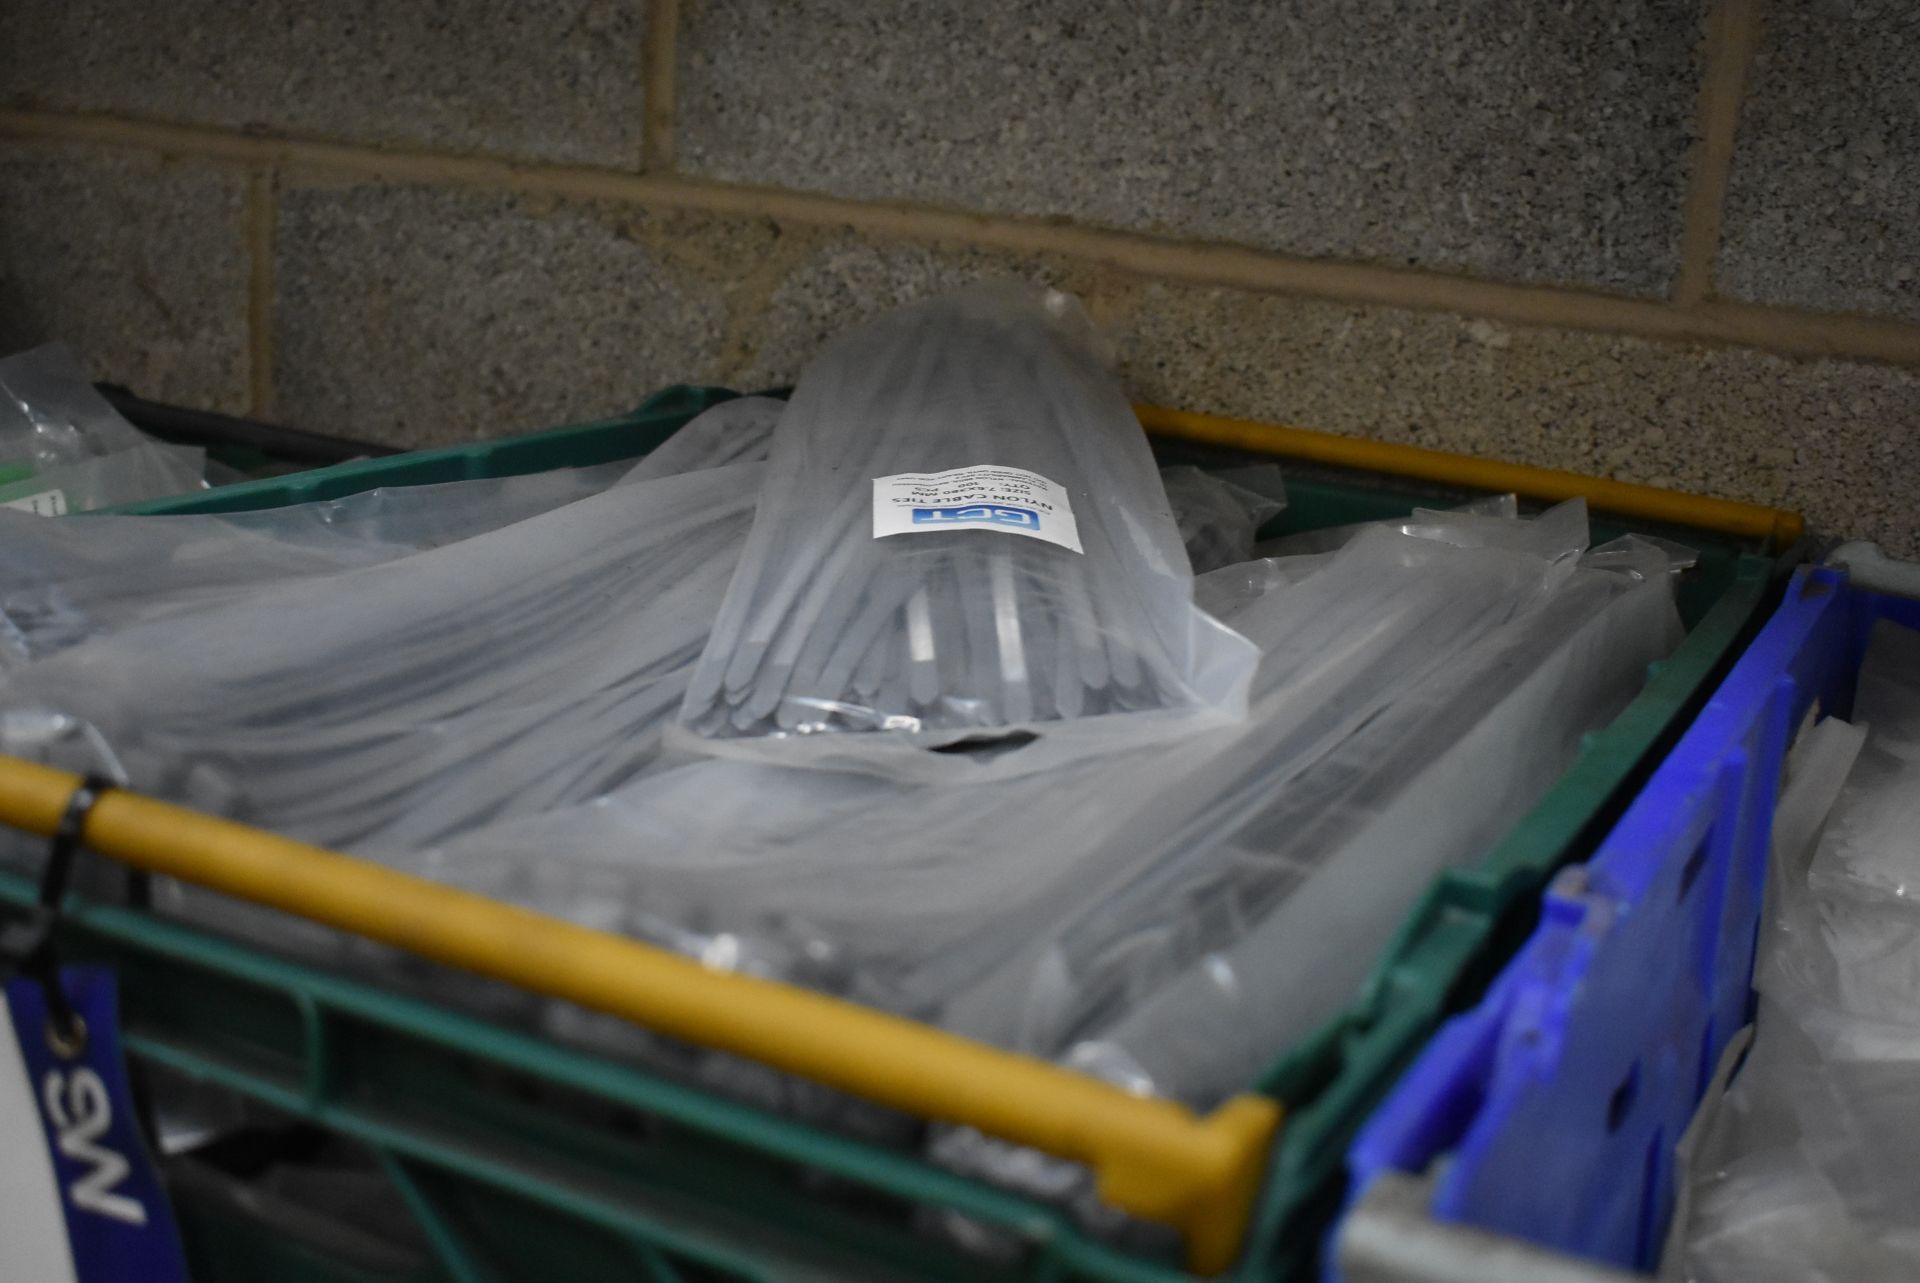 Approx. 40 Bags x 100 7.6 x 380mm Grey Cable Ties, with plastic crate - Image 2 of 3